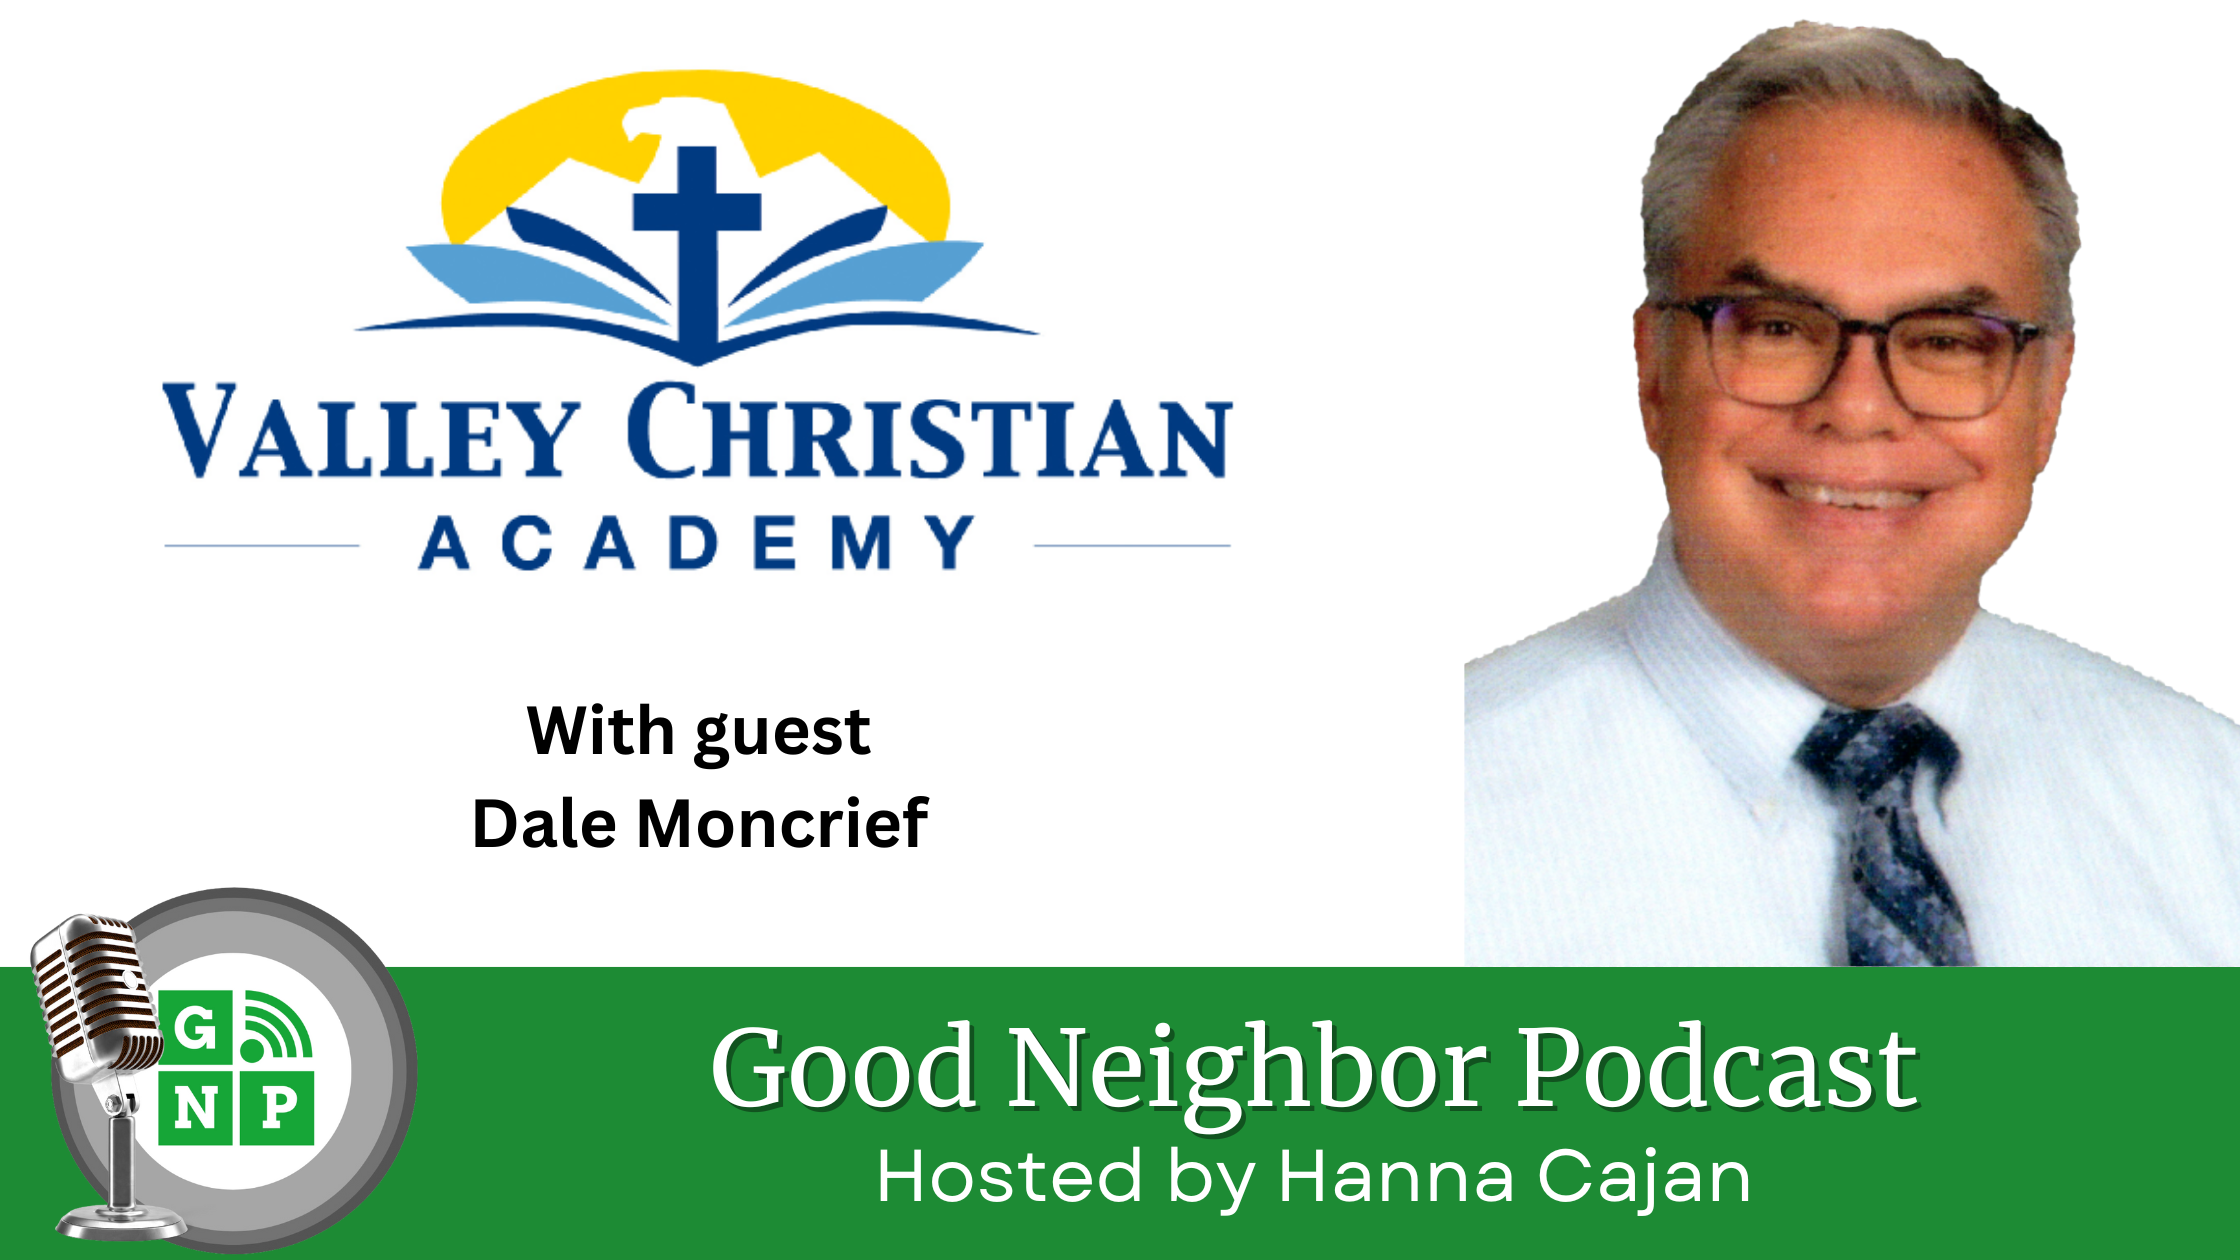 Episode 6: Valley Christian Academy with Dale Moncrief